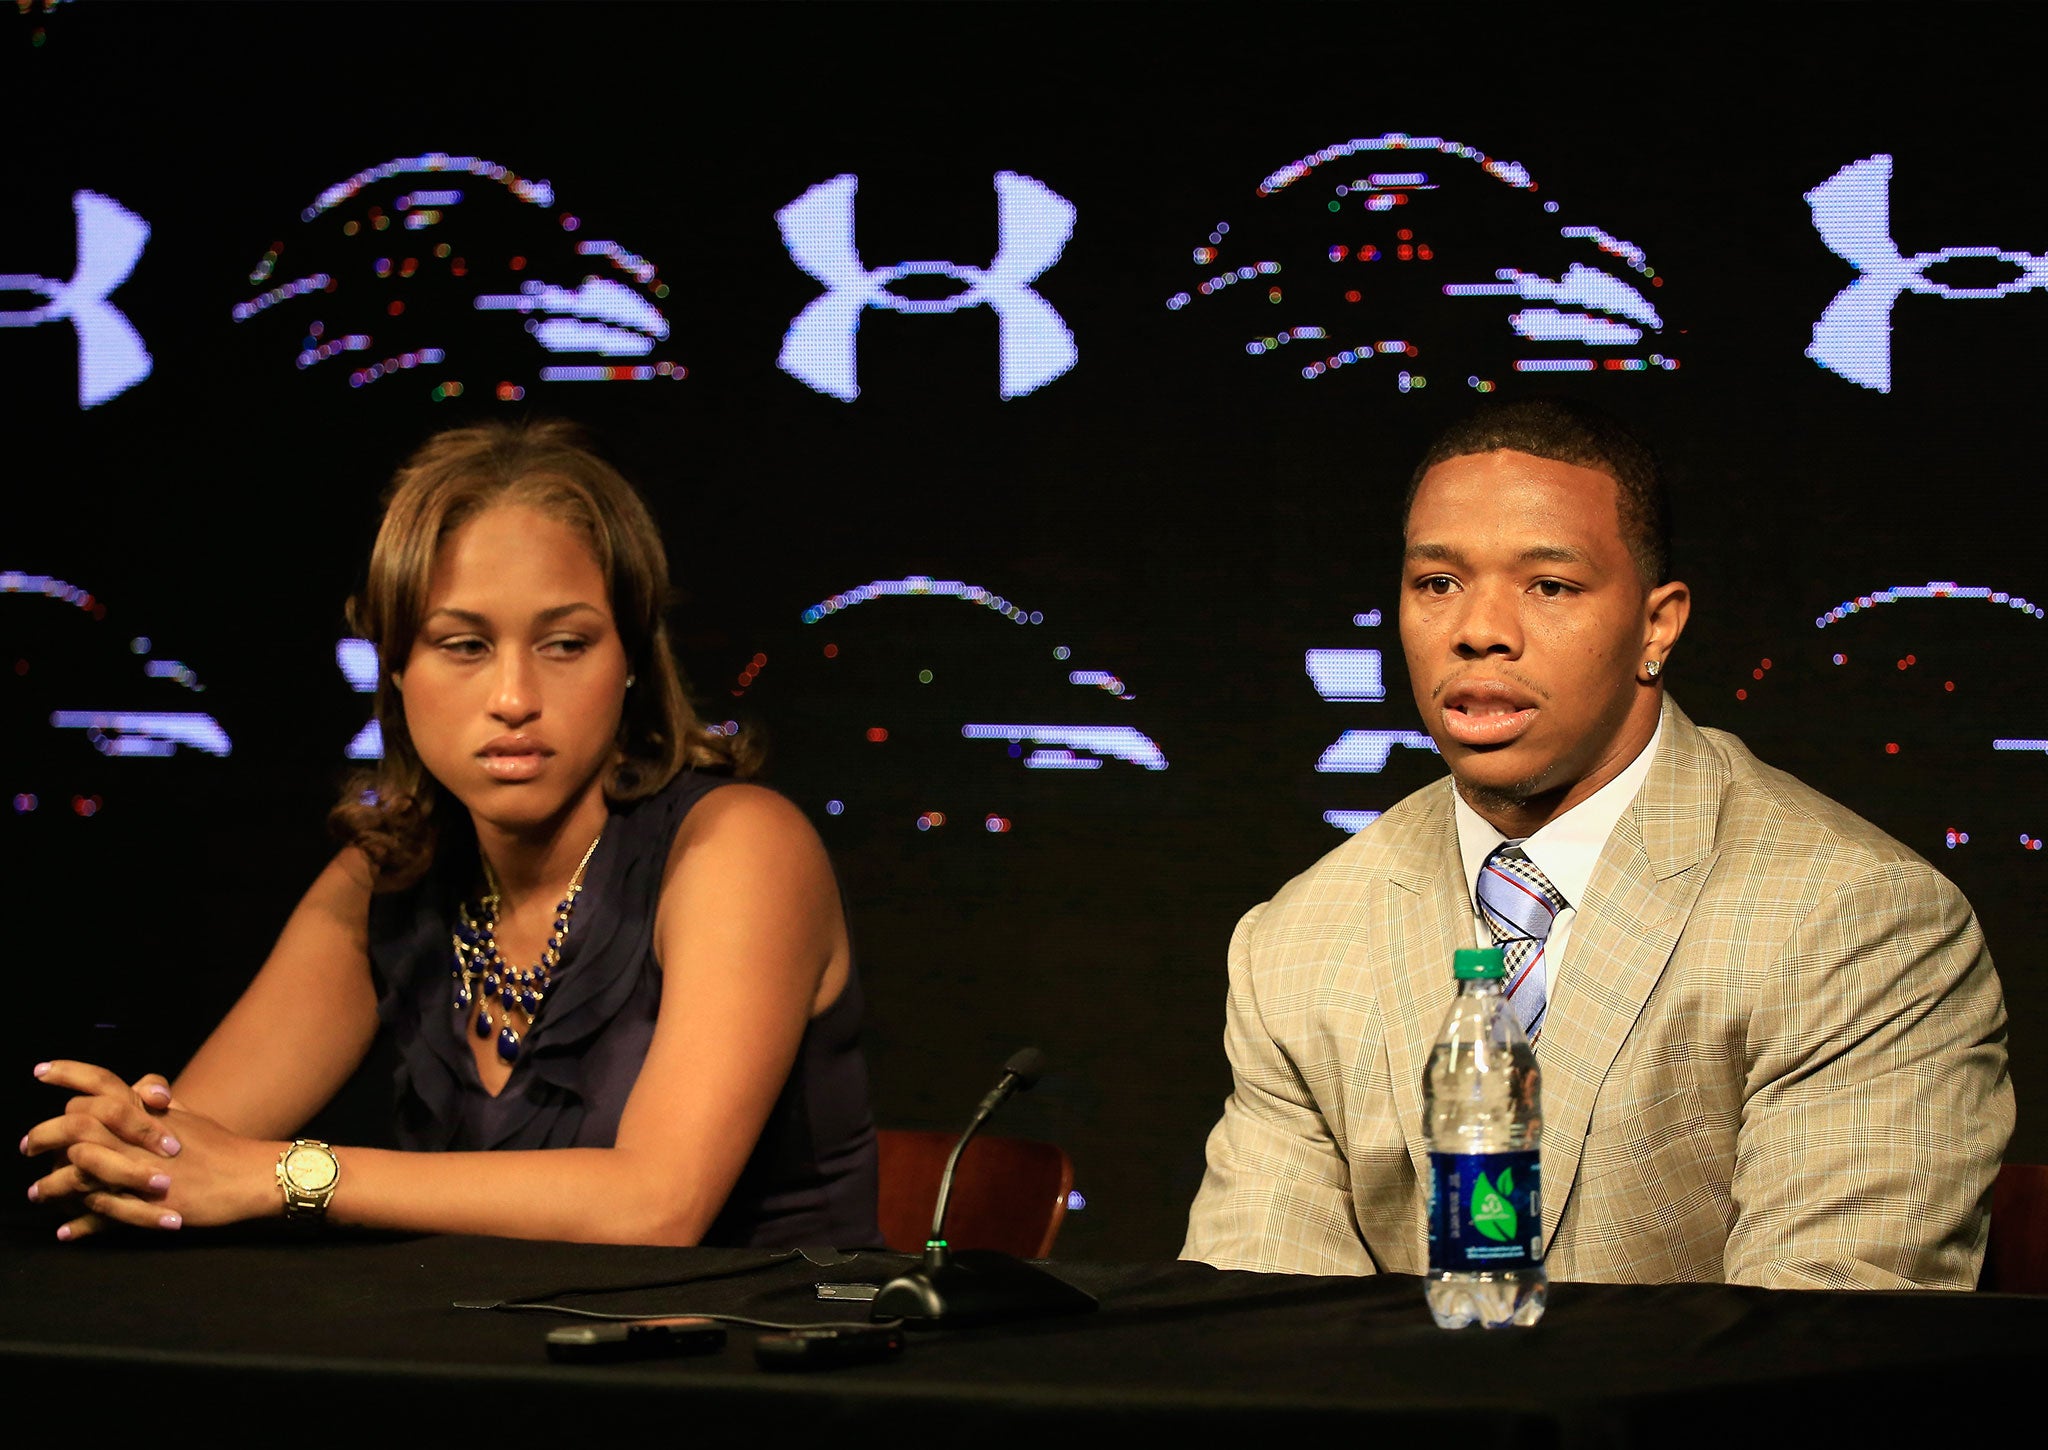 Running back Ray Rice of the Baltimore Ravens addresses a news conference with his wife Janay at the Ravens training center on May 23, 2014